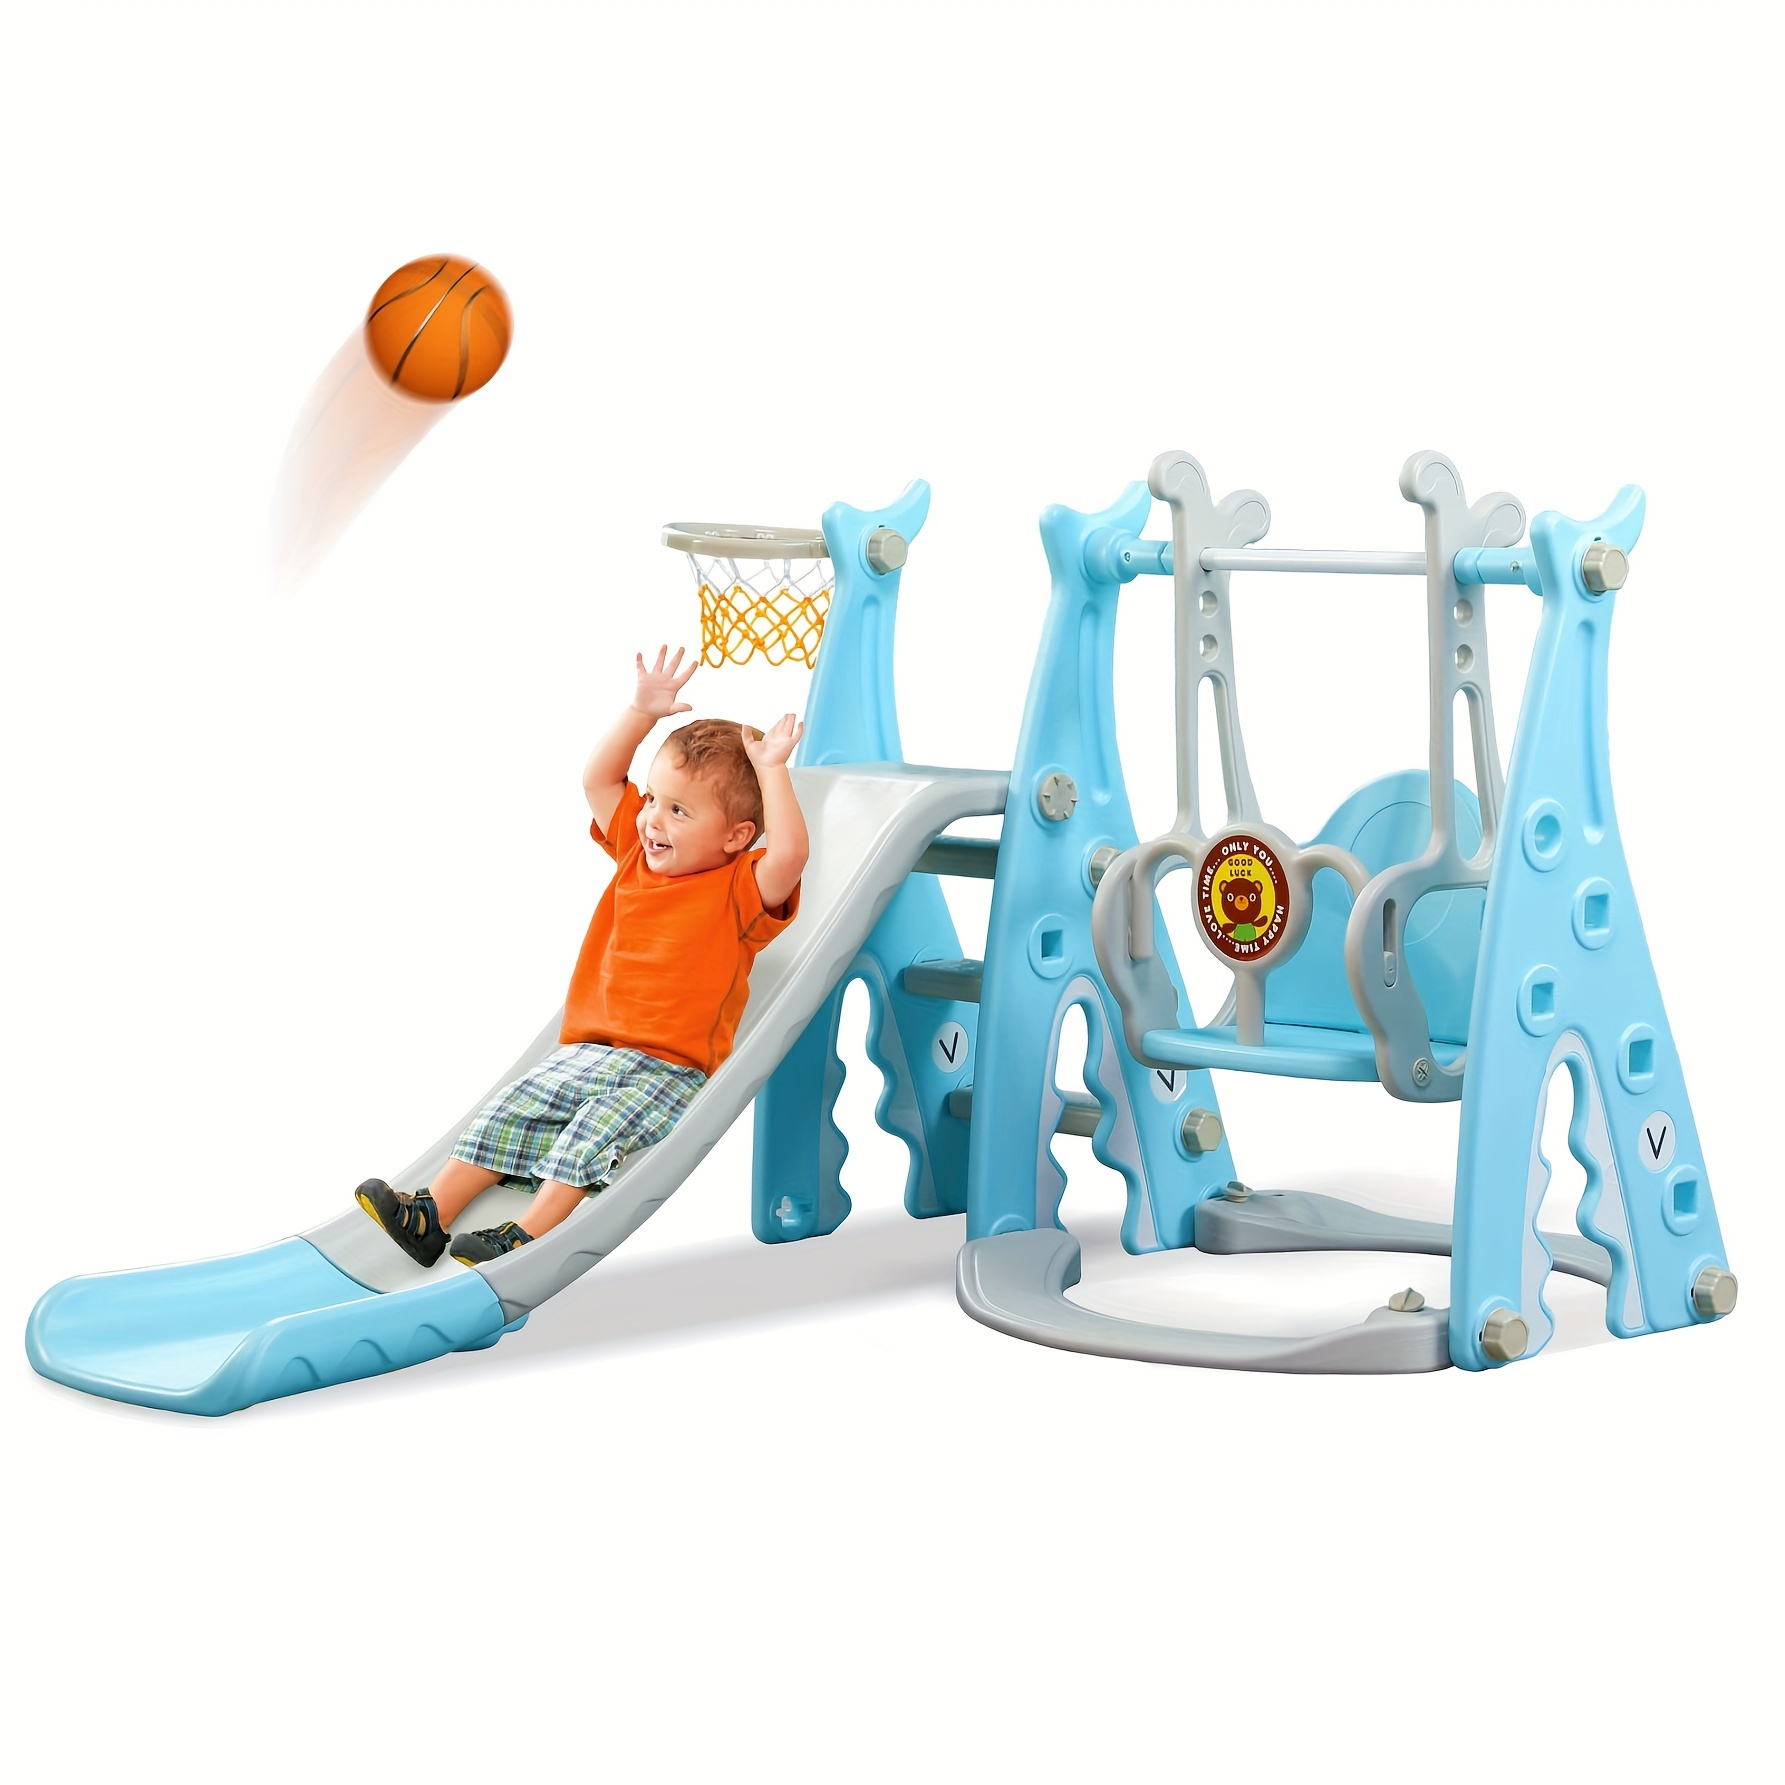 

Nukied Toddlers Slide And Swing Set 4 In 1, Kids Outdoor And Indoor Playhouse With Slide And Swing For Boys And Girls With Basketball Hoop, Extra Long Slide Easy Set Up Baby Playset